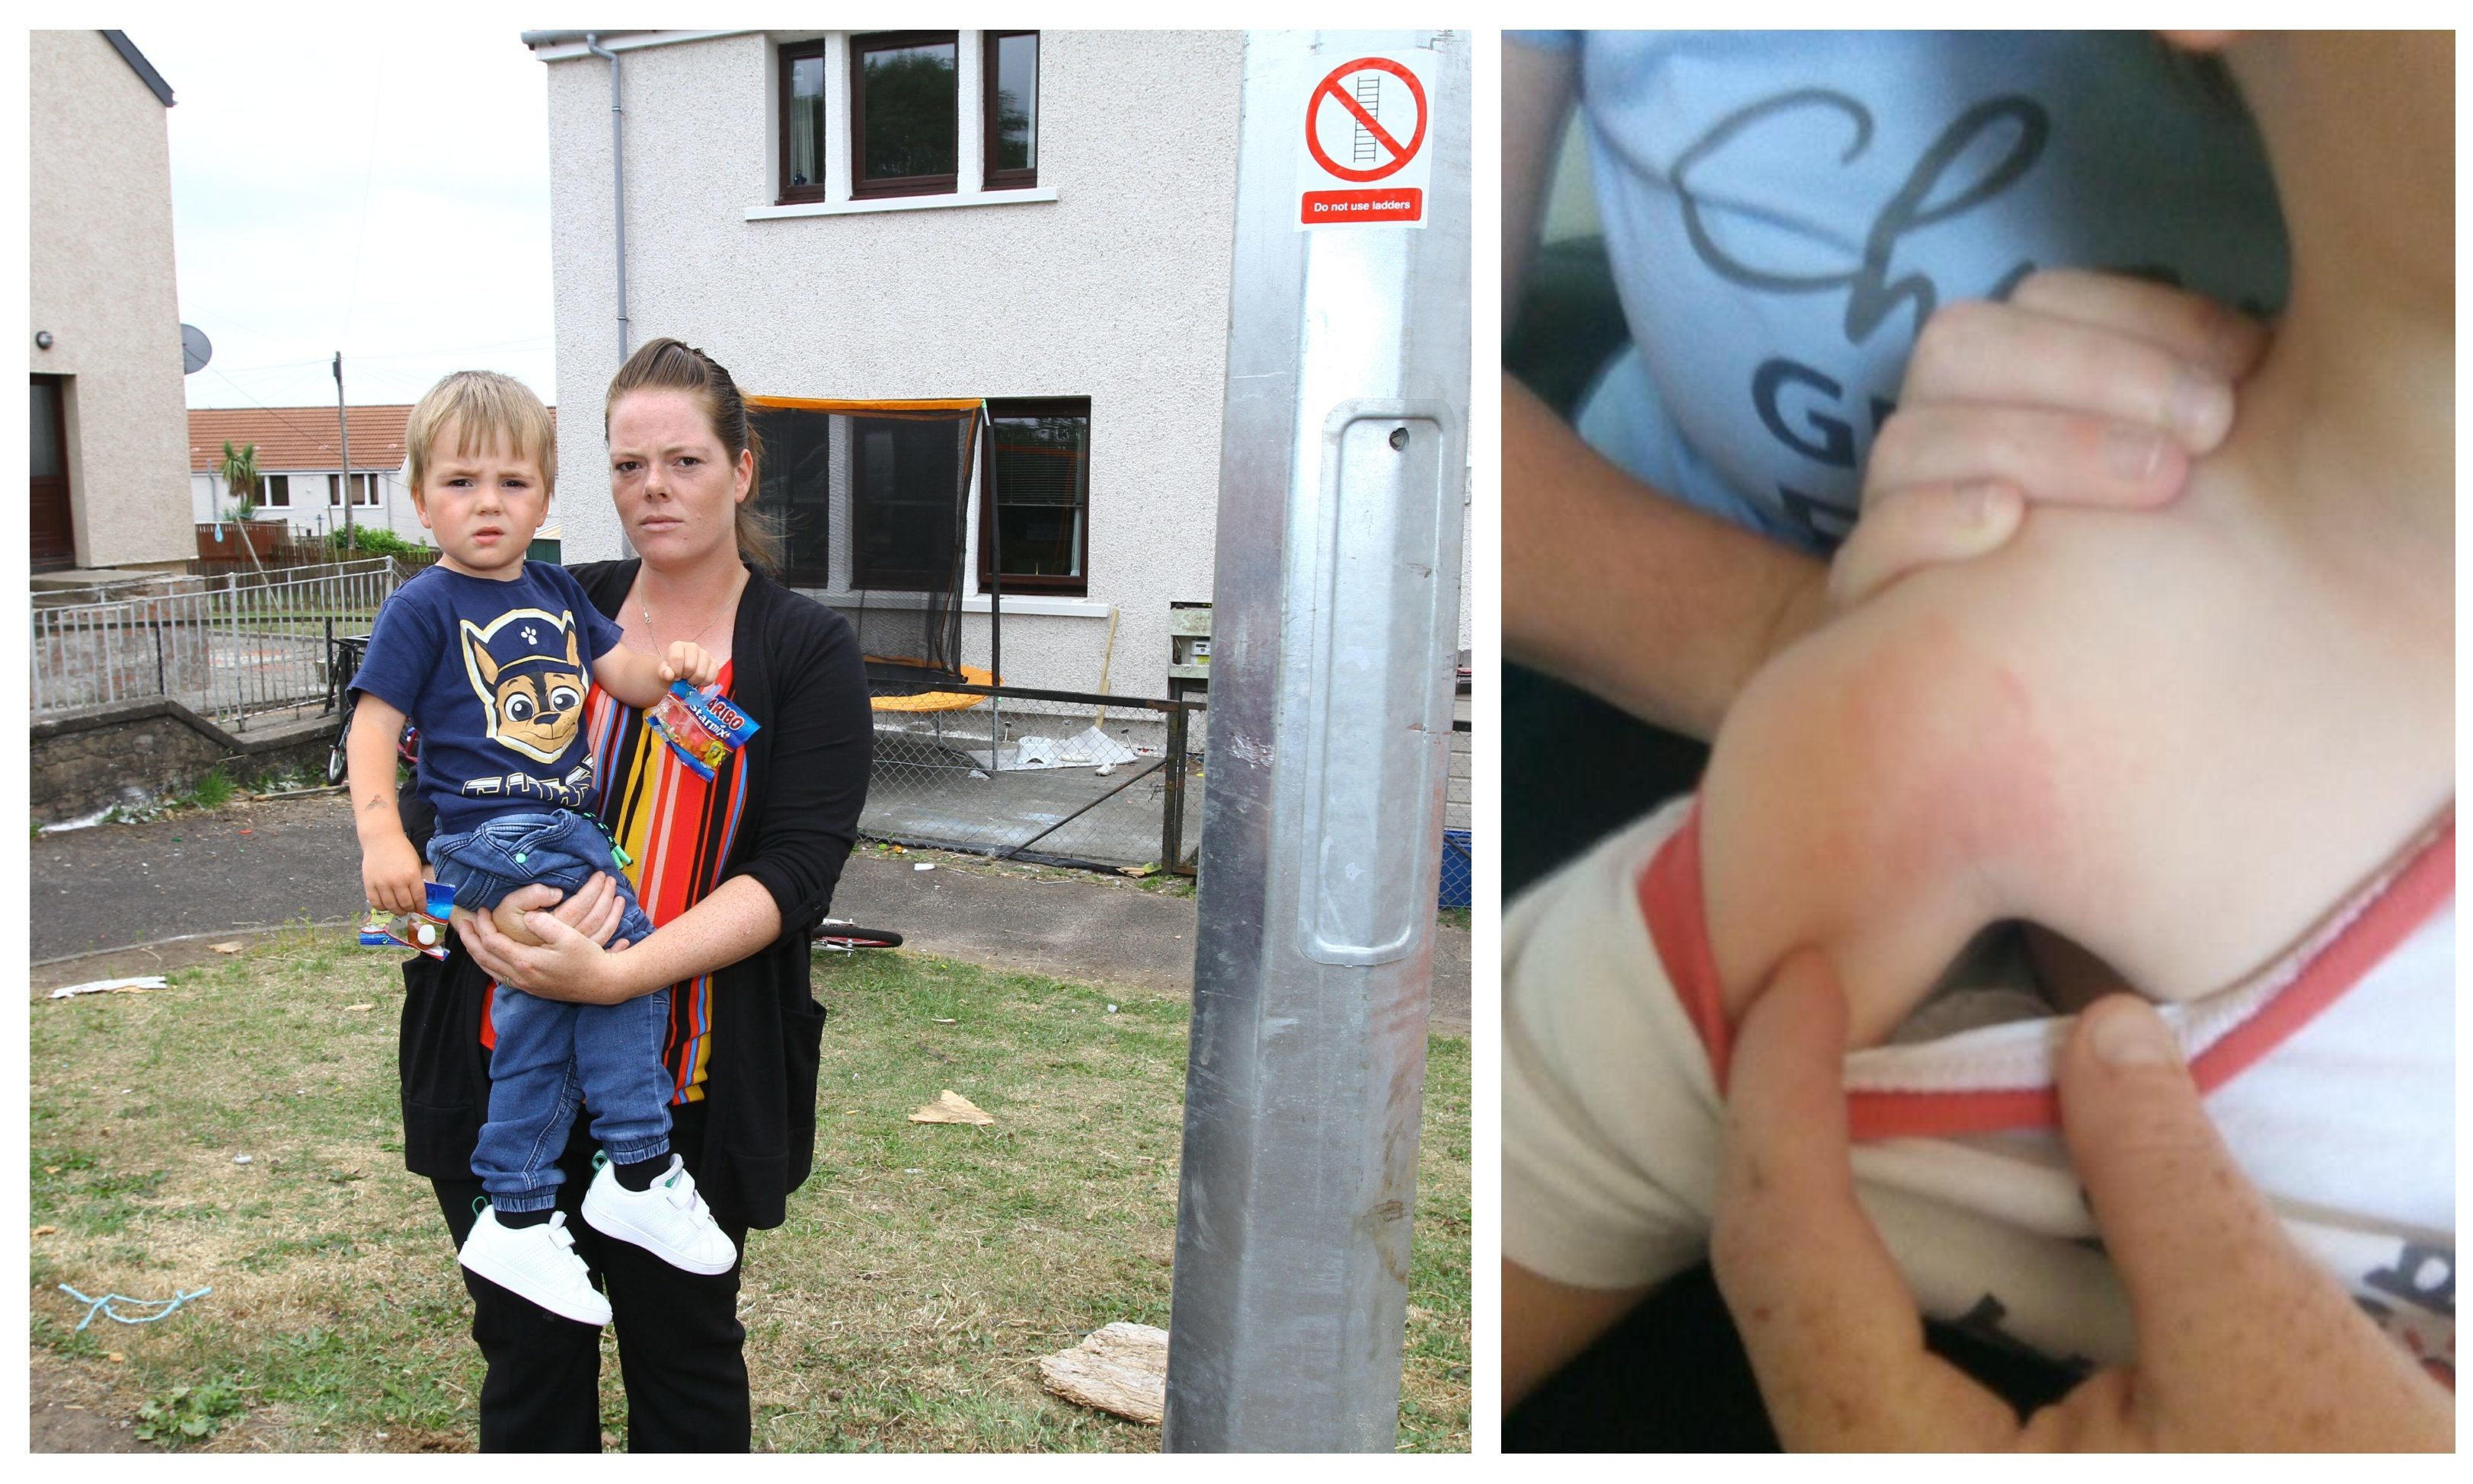 Sarah Watt and son, Adam. Right: Adam's injuries shown 10 days after the incident.